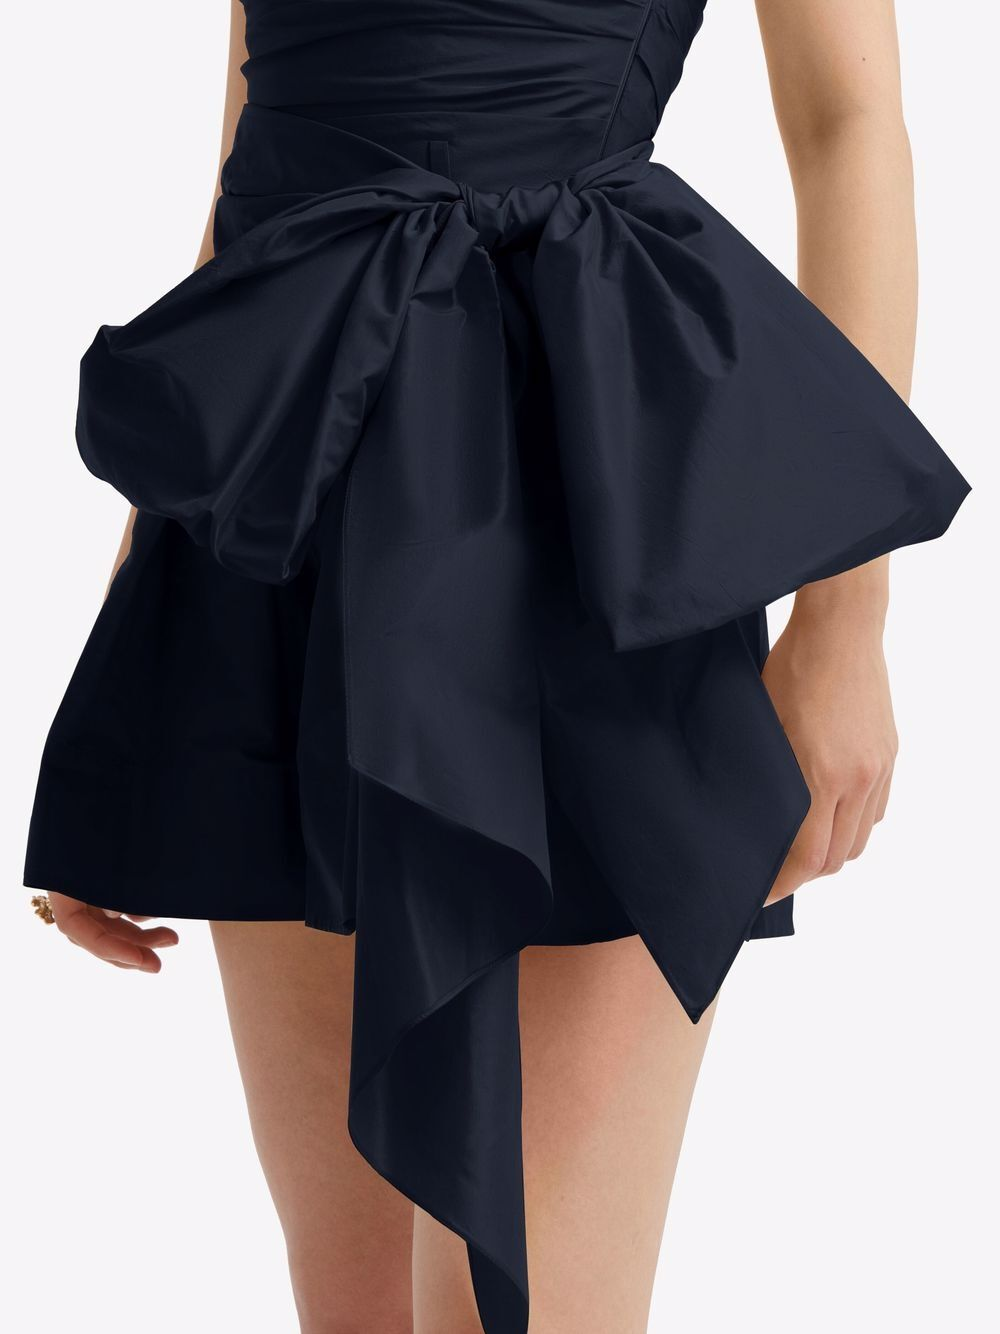 Strapless Homecoming Dress,New Arrival Party Dress Y2293